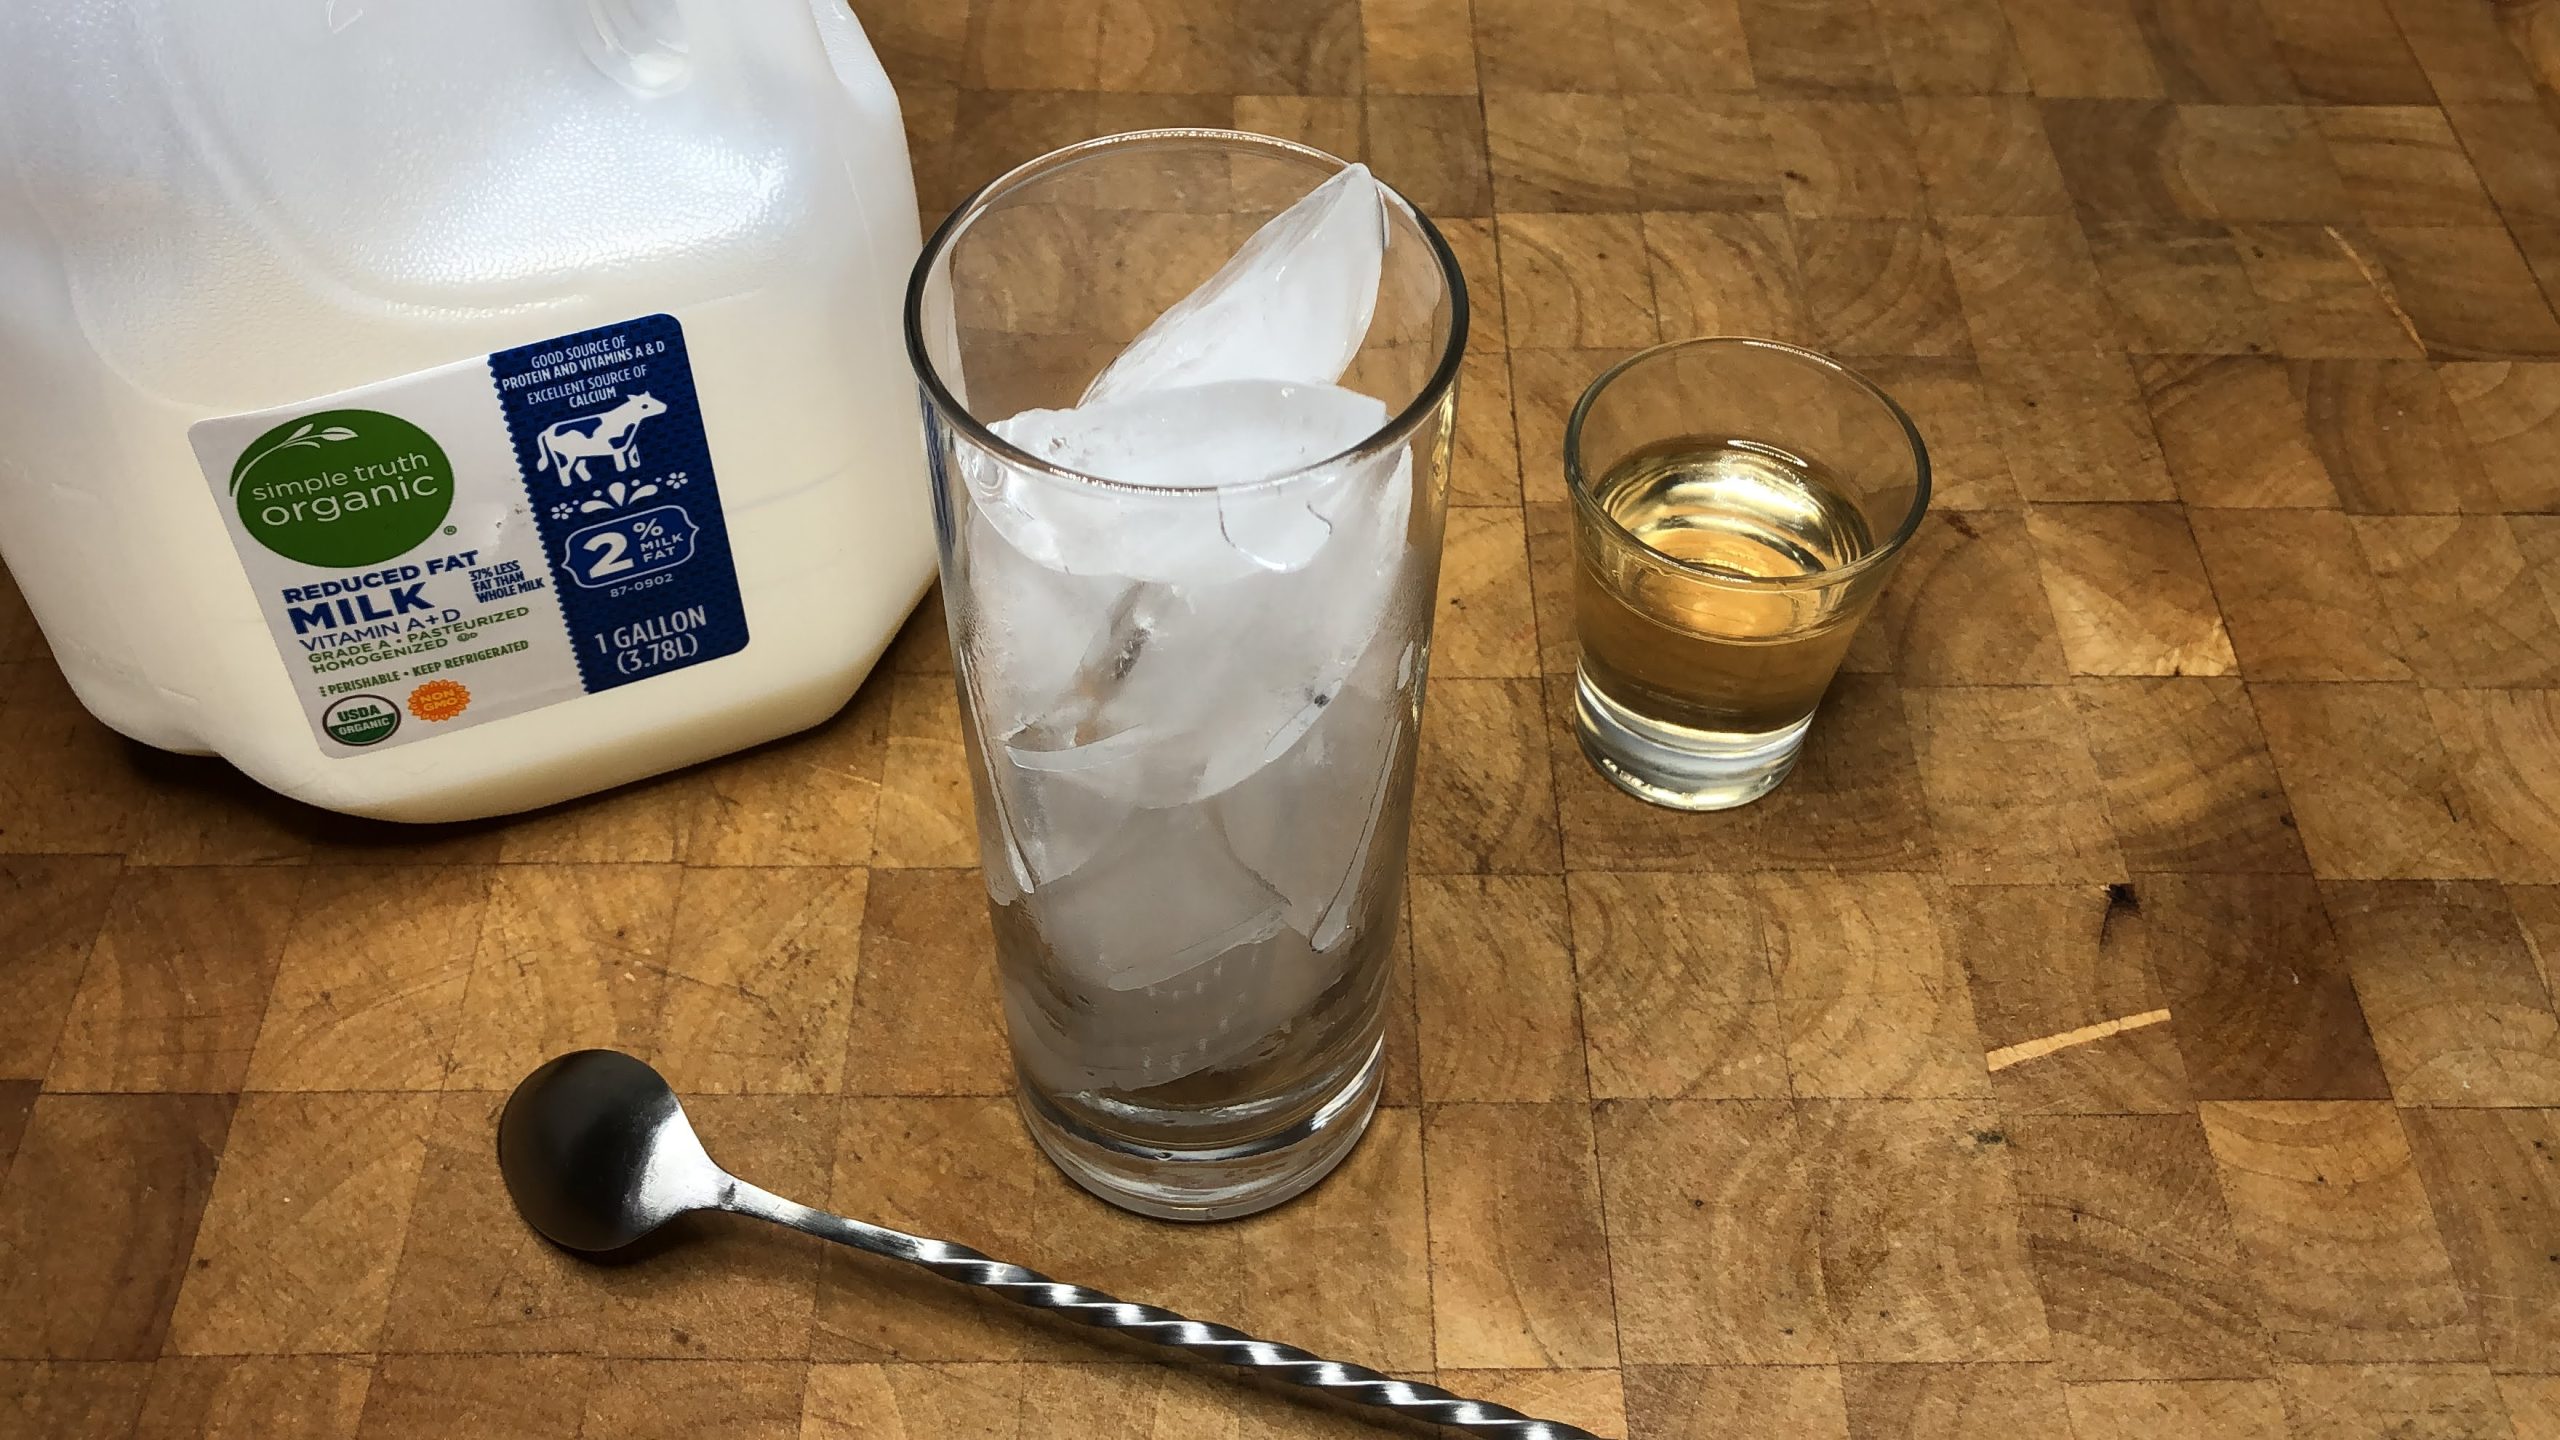 Highball glass with ice next to a bar spoon, cinnamon syrup and a carton of milk.